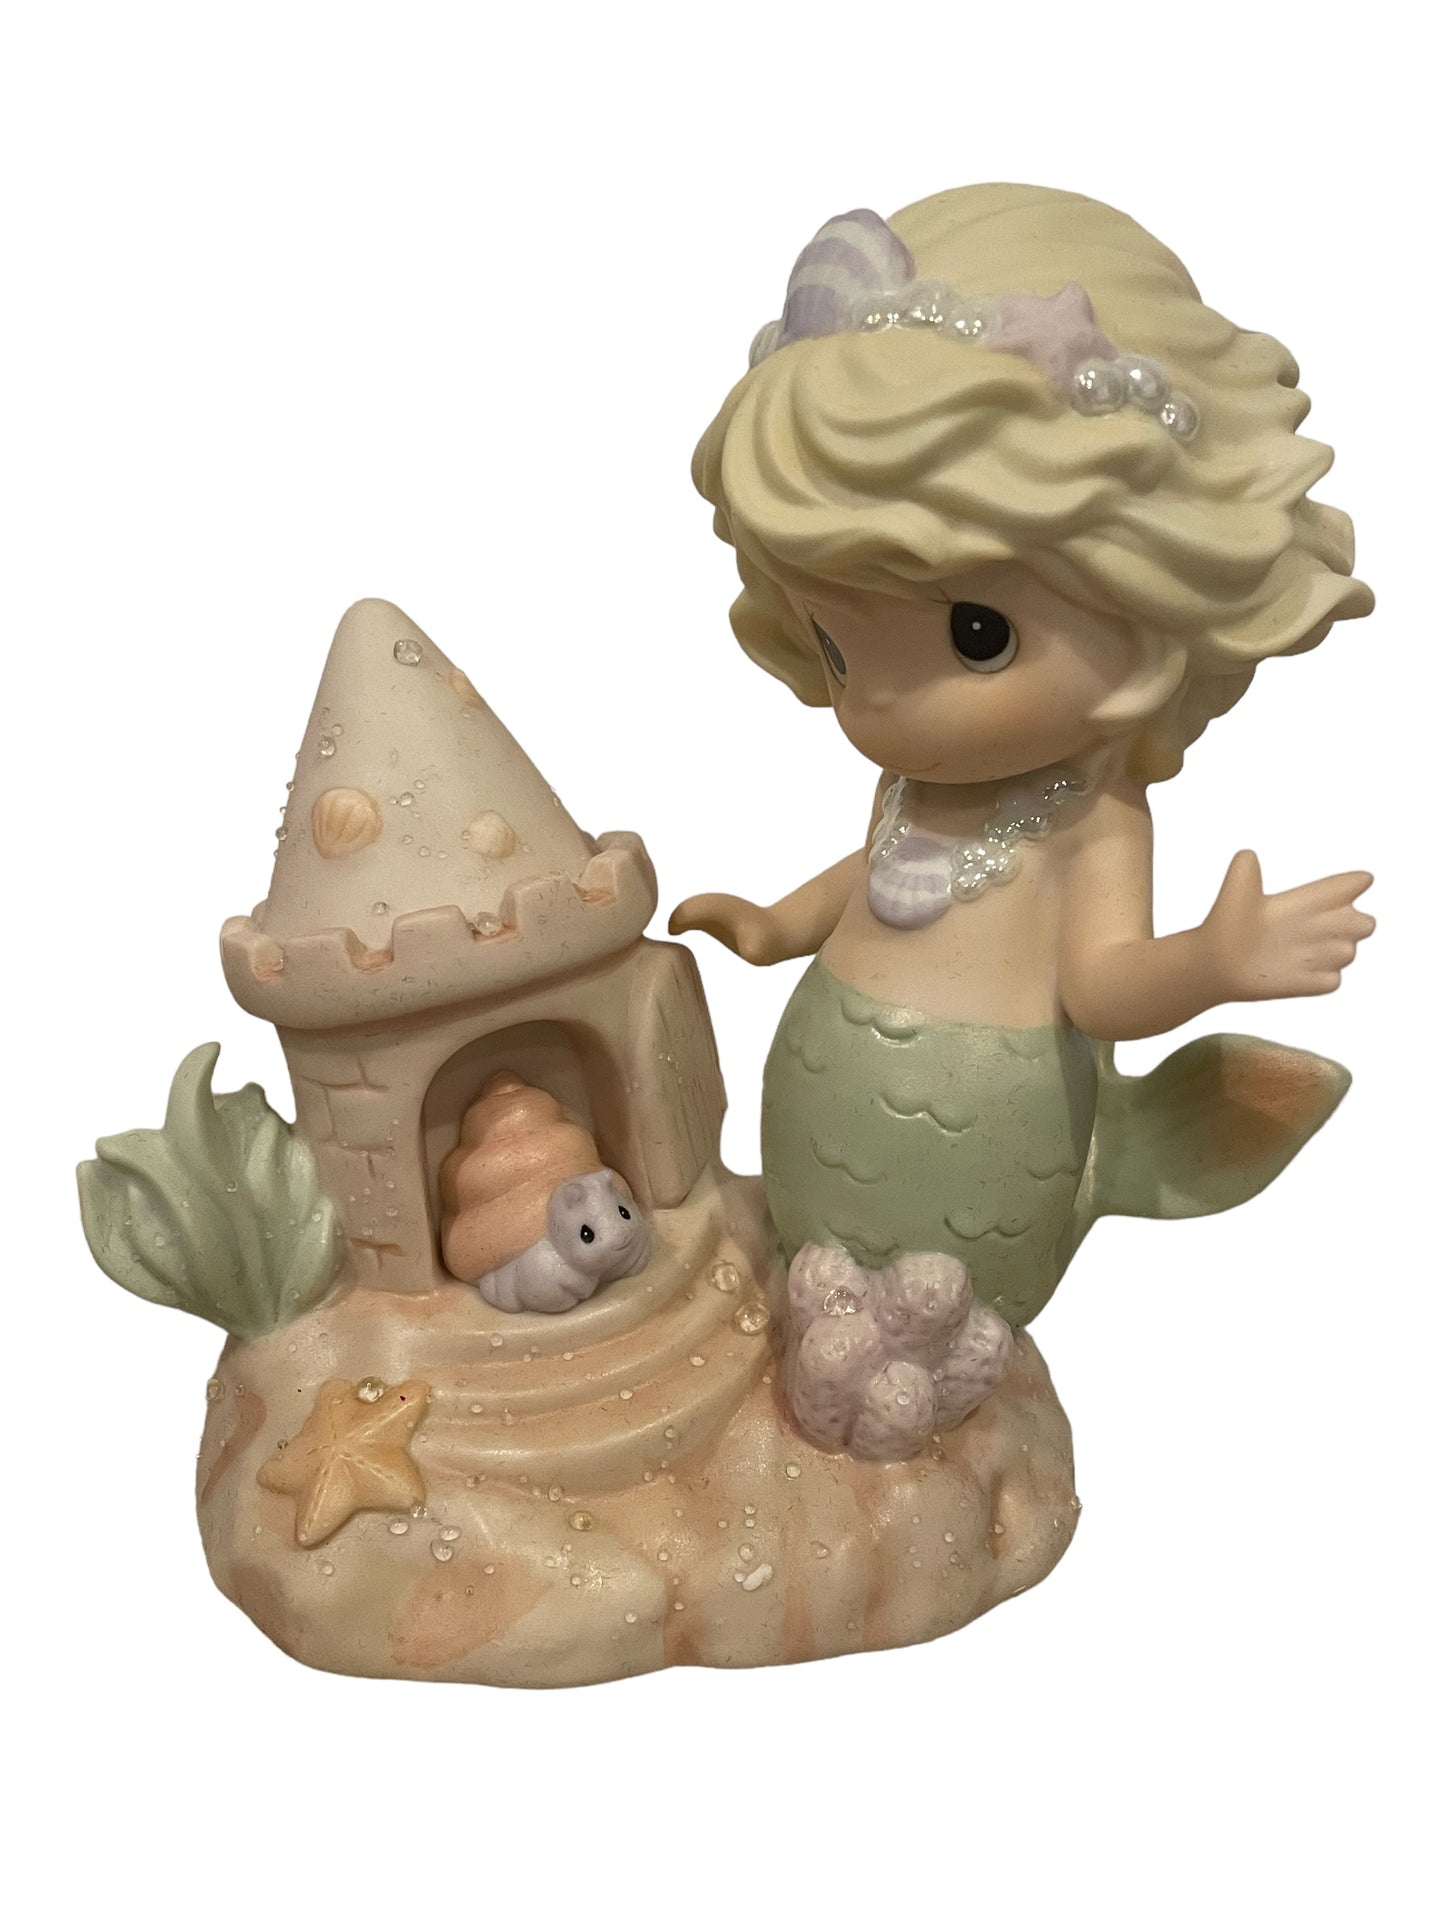 You Bring Me Out Of My Shell - Precious Moments Figurine